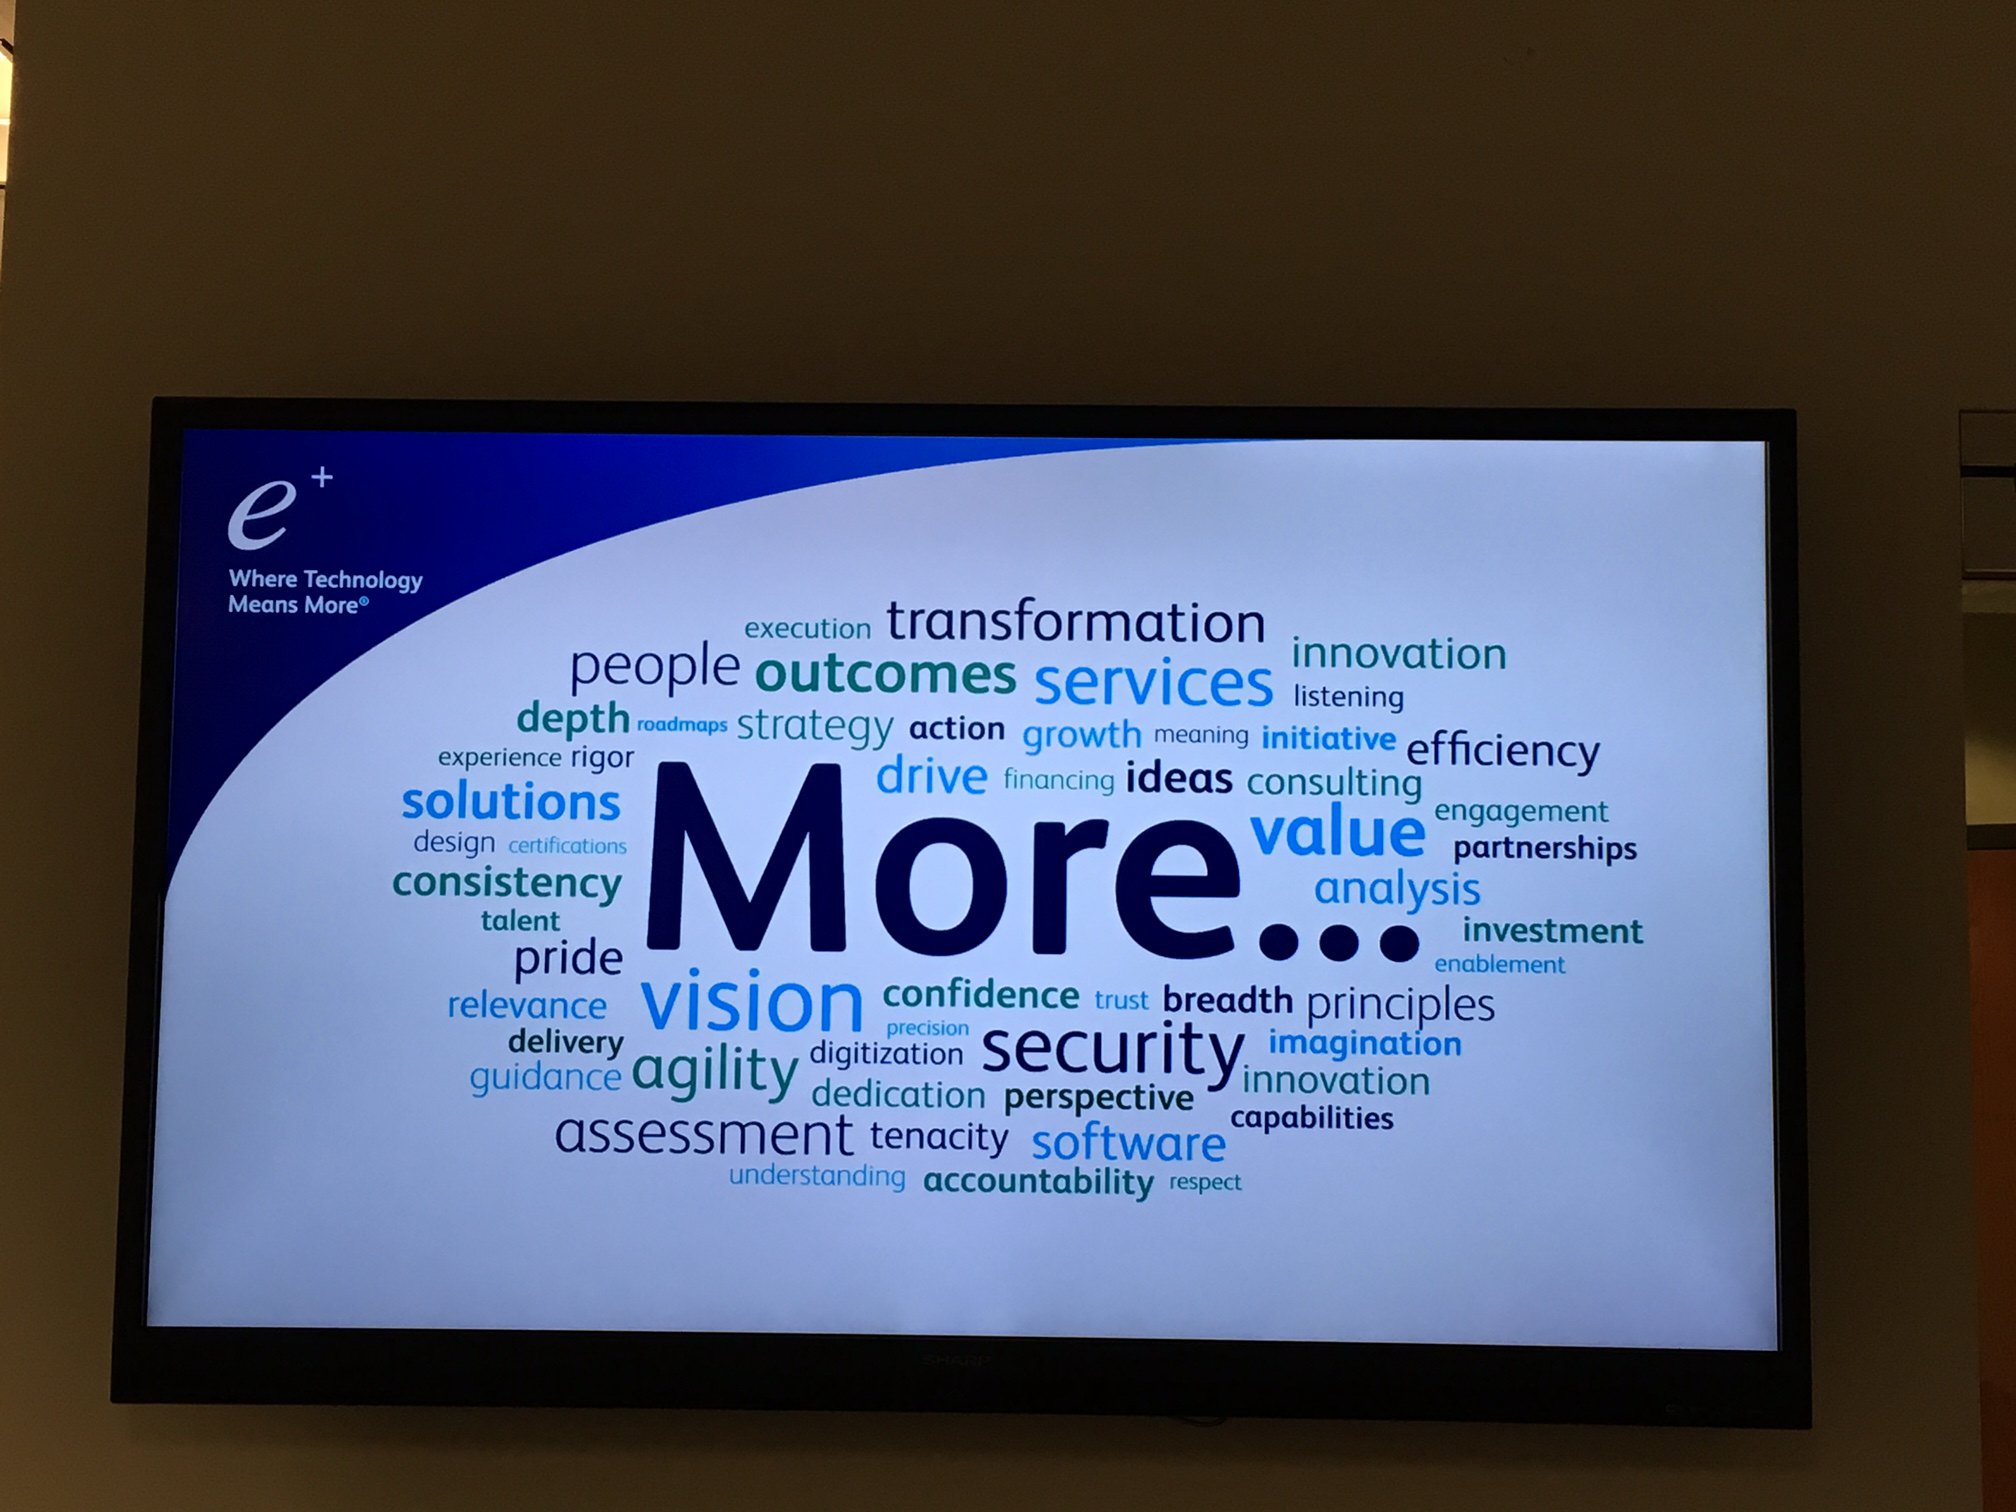  "MORE..." AS THE LARGEST AND CENTRAL ELEMENT IN A WORD CLOUD